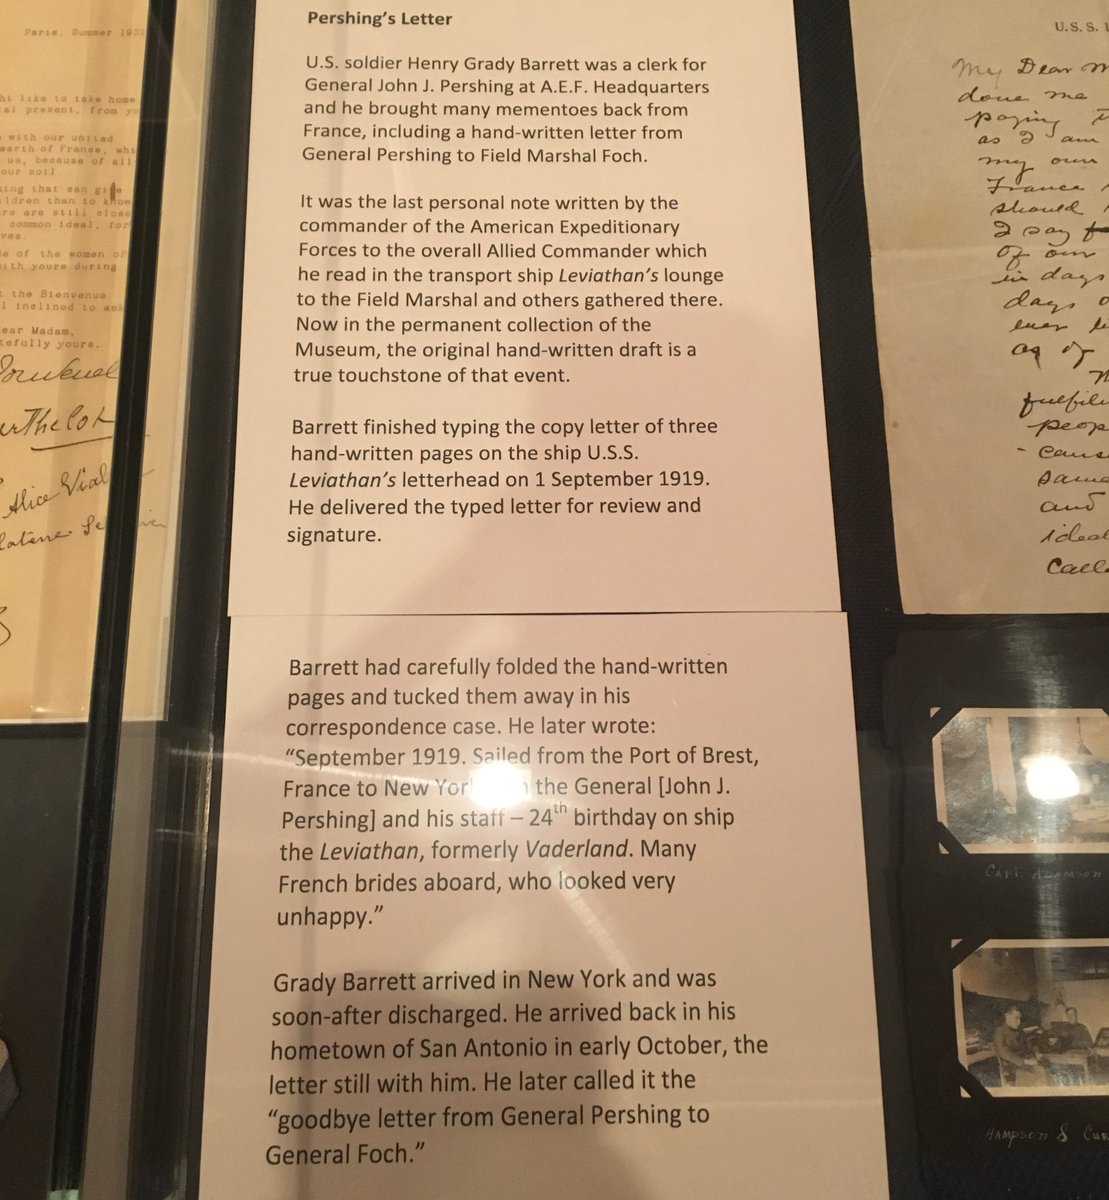 Army clerk Henry Grady Barrett saved the original draft copy of Gen. Pershing’s farewell letter to Field Marshal Foch. He’s in some of the photos below.